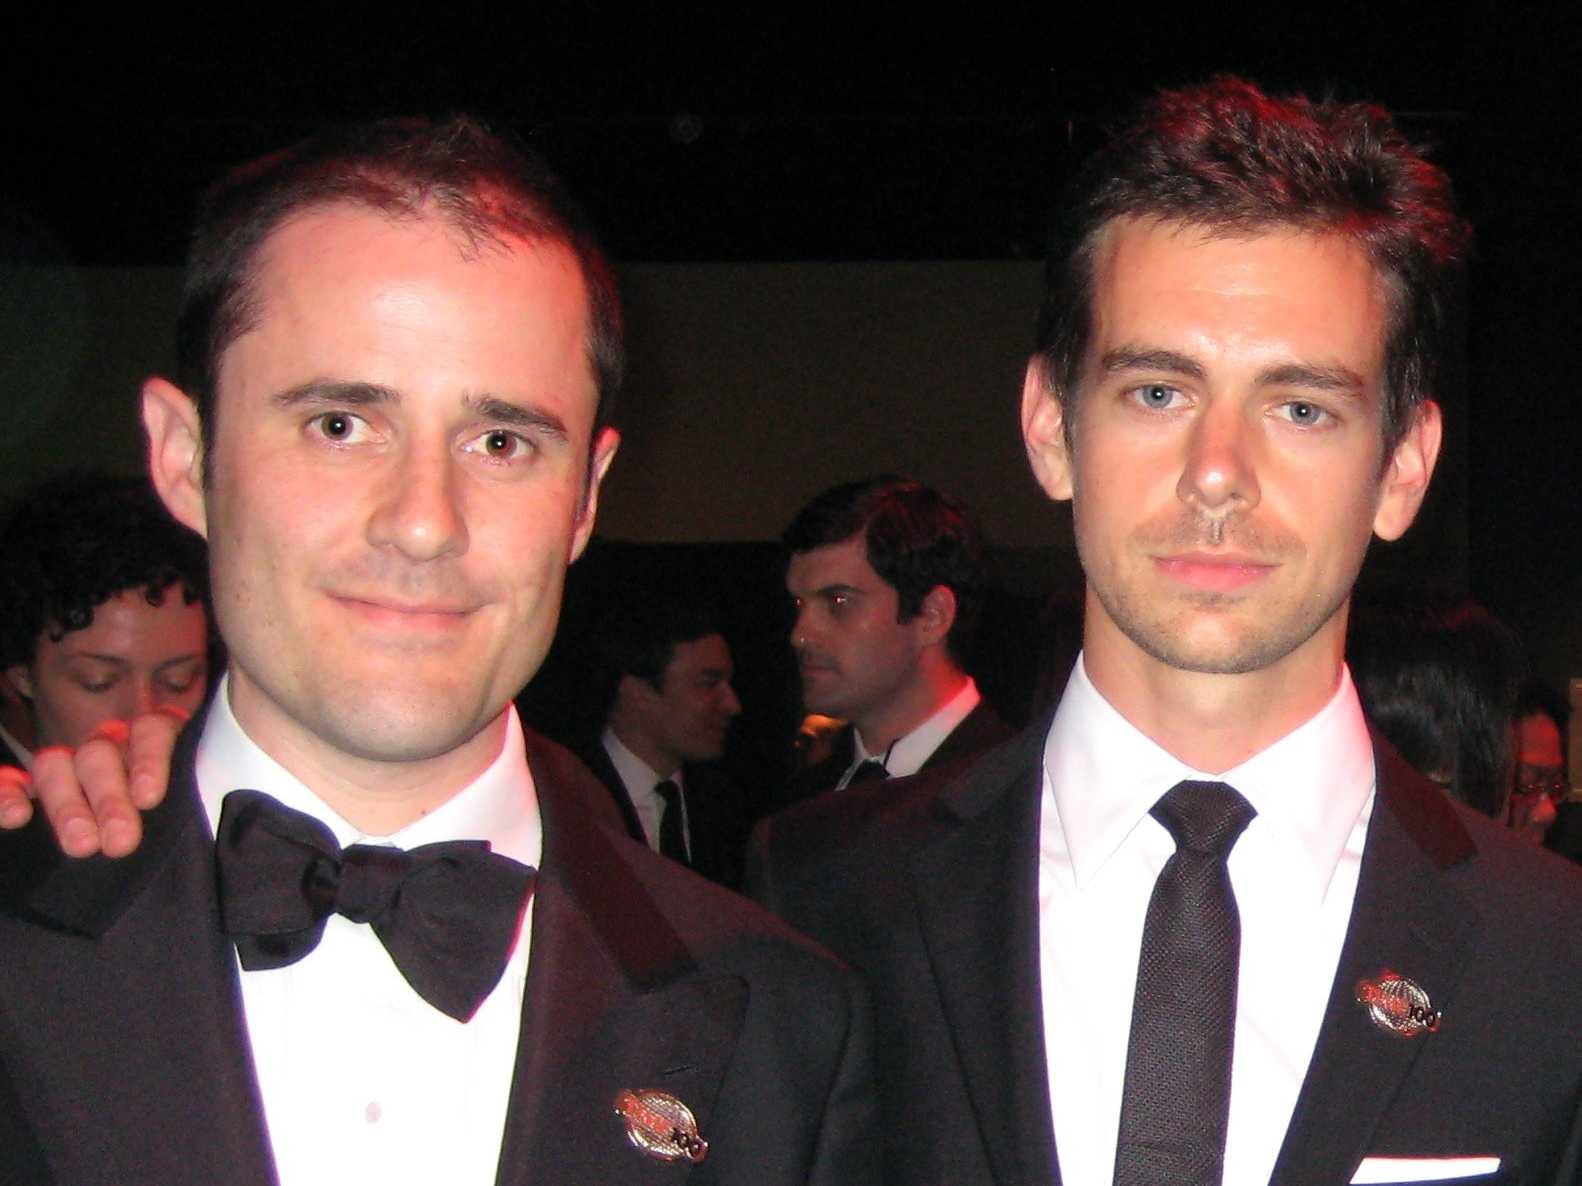 Evan Williams and Jack Dorsey in suits and ties.